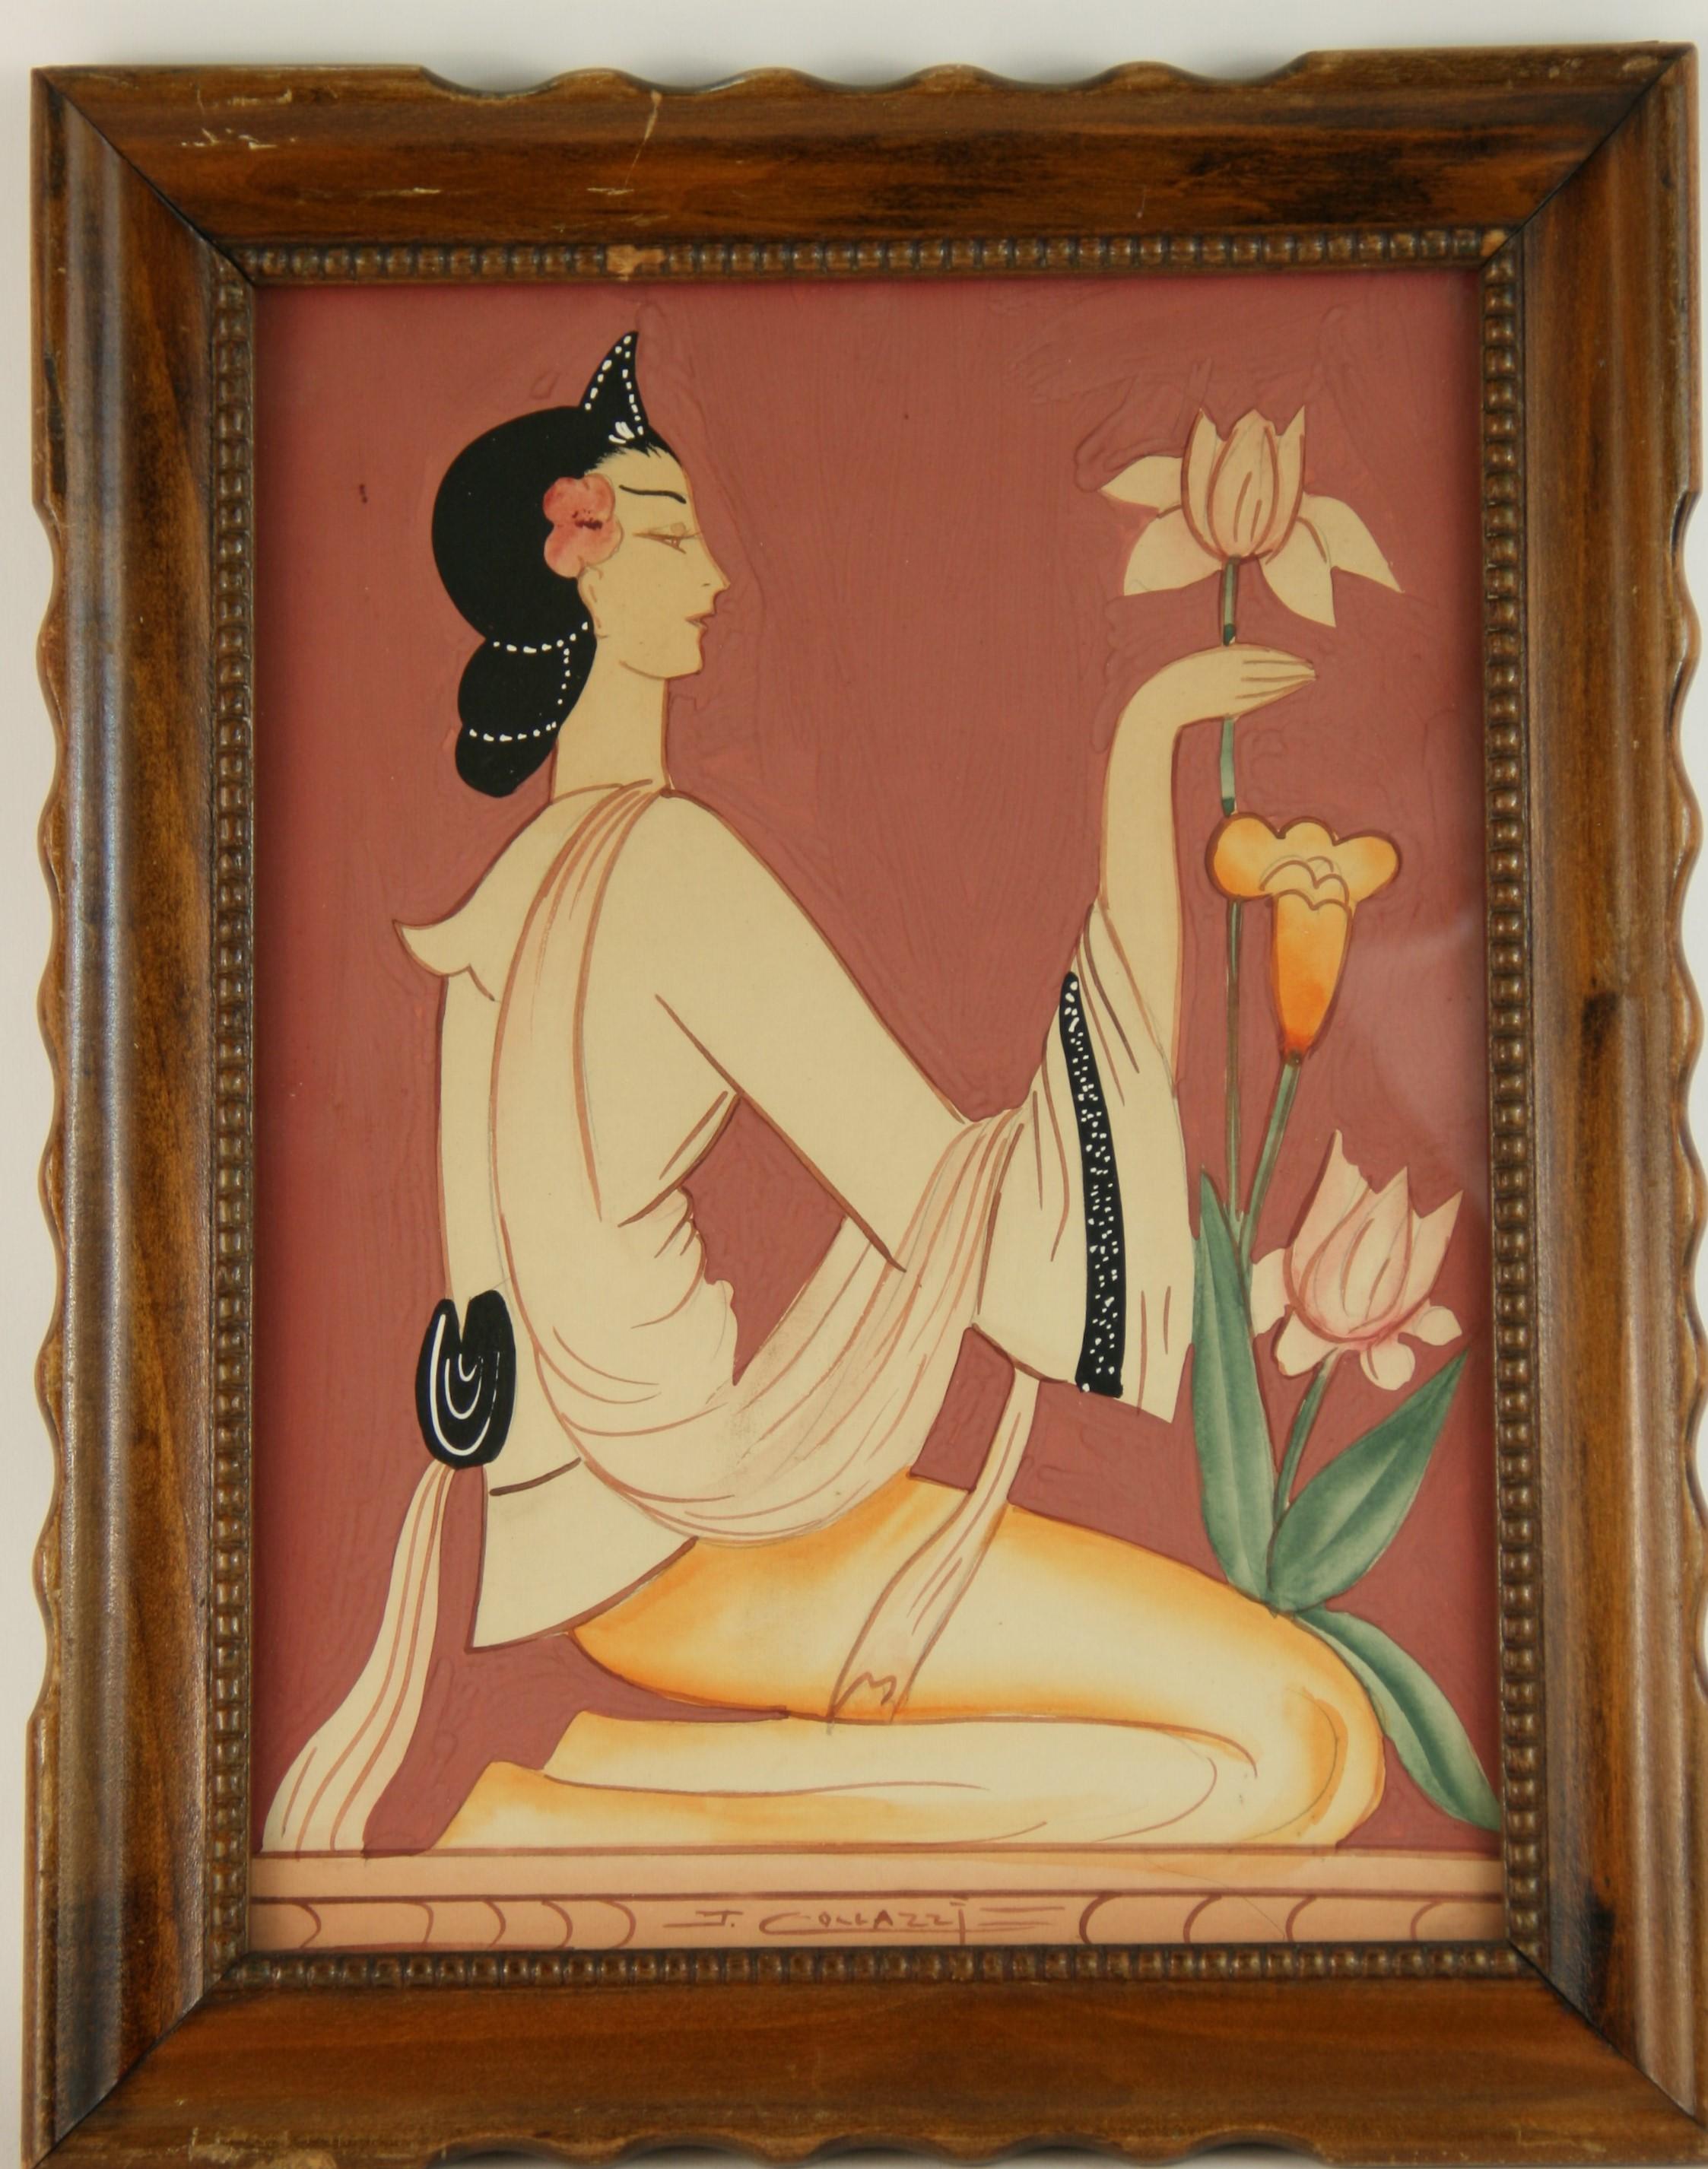 3770 Art Deco gouache on paper under glass set in a handmade frame
Image size 8.5 x 11.5